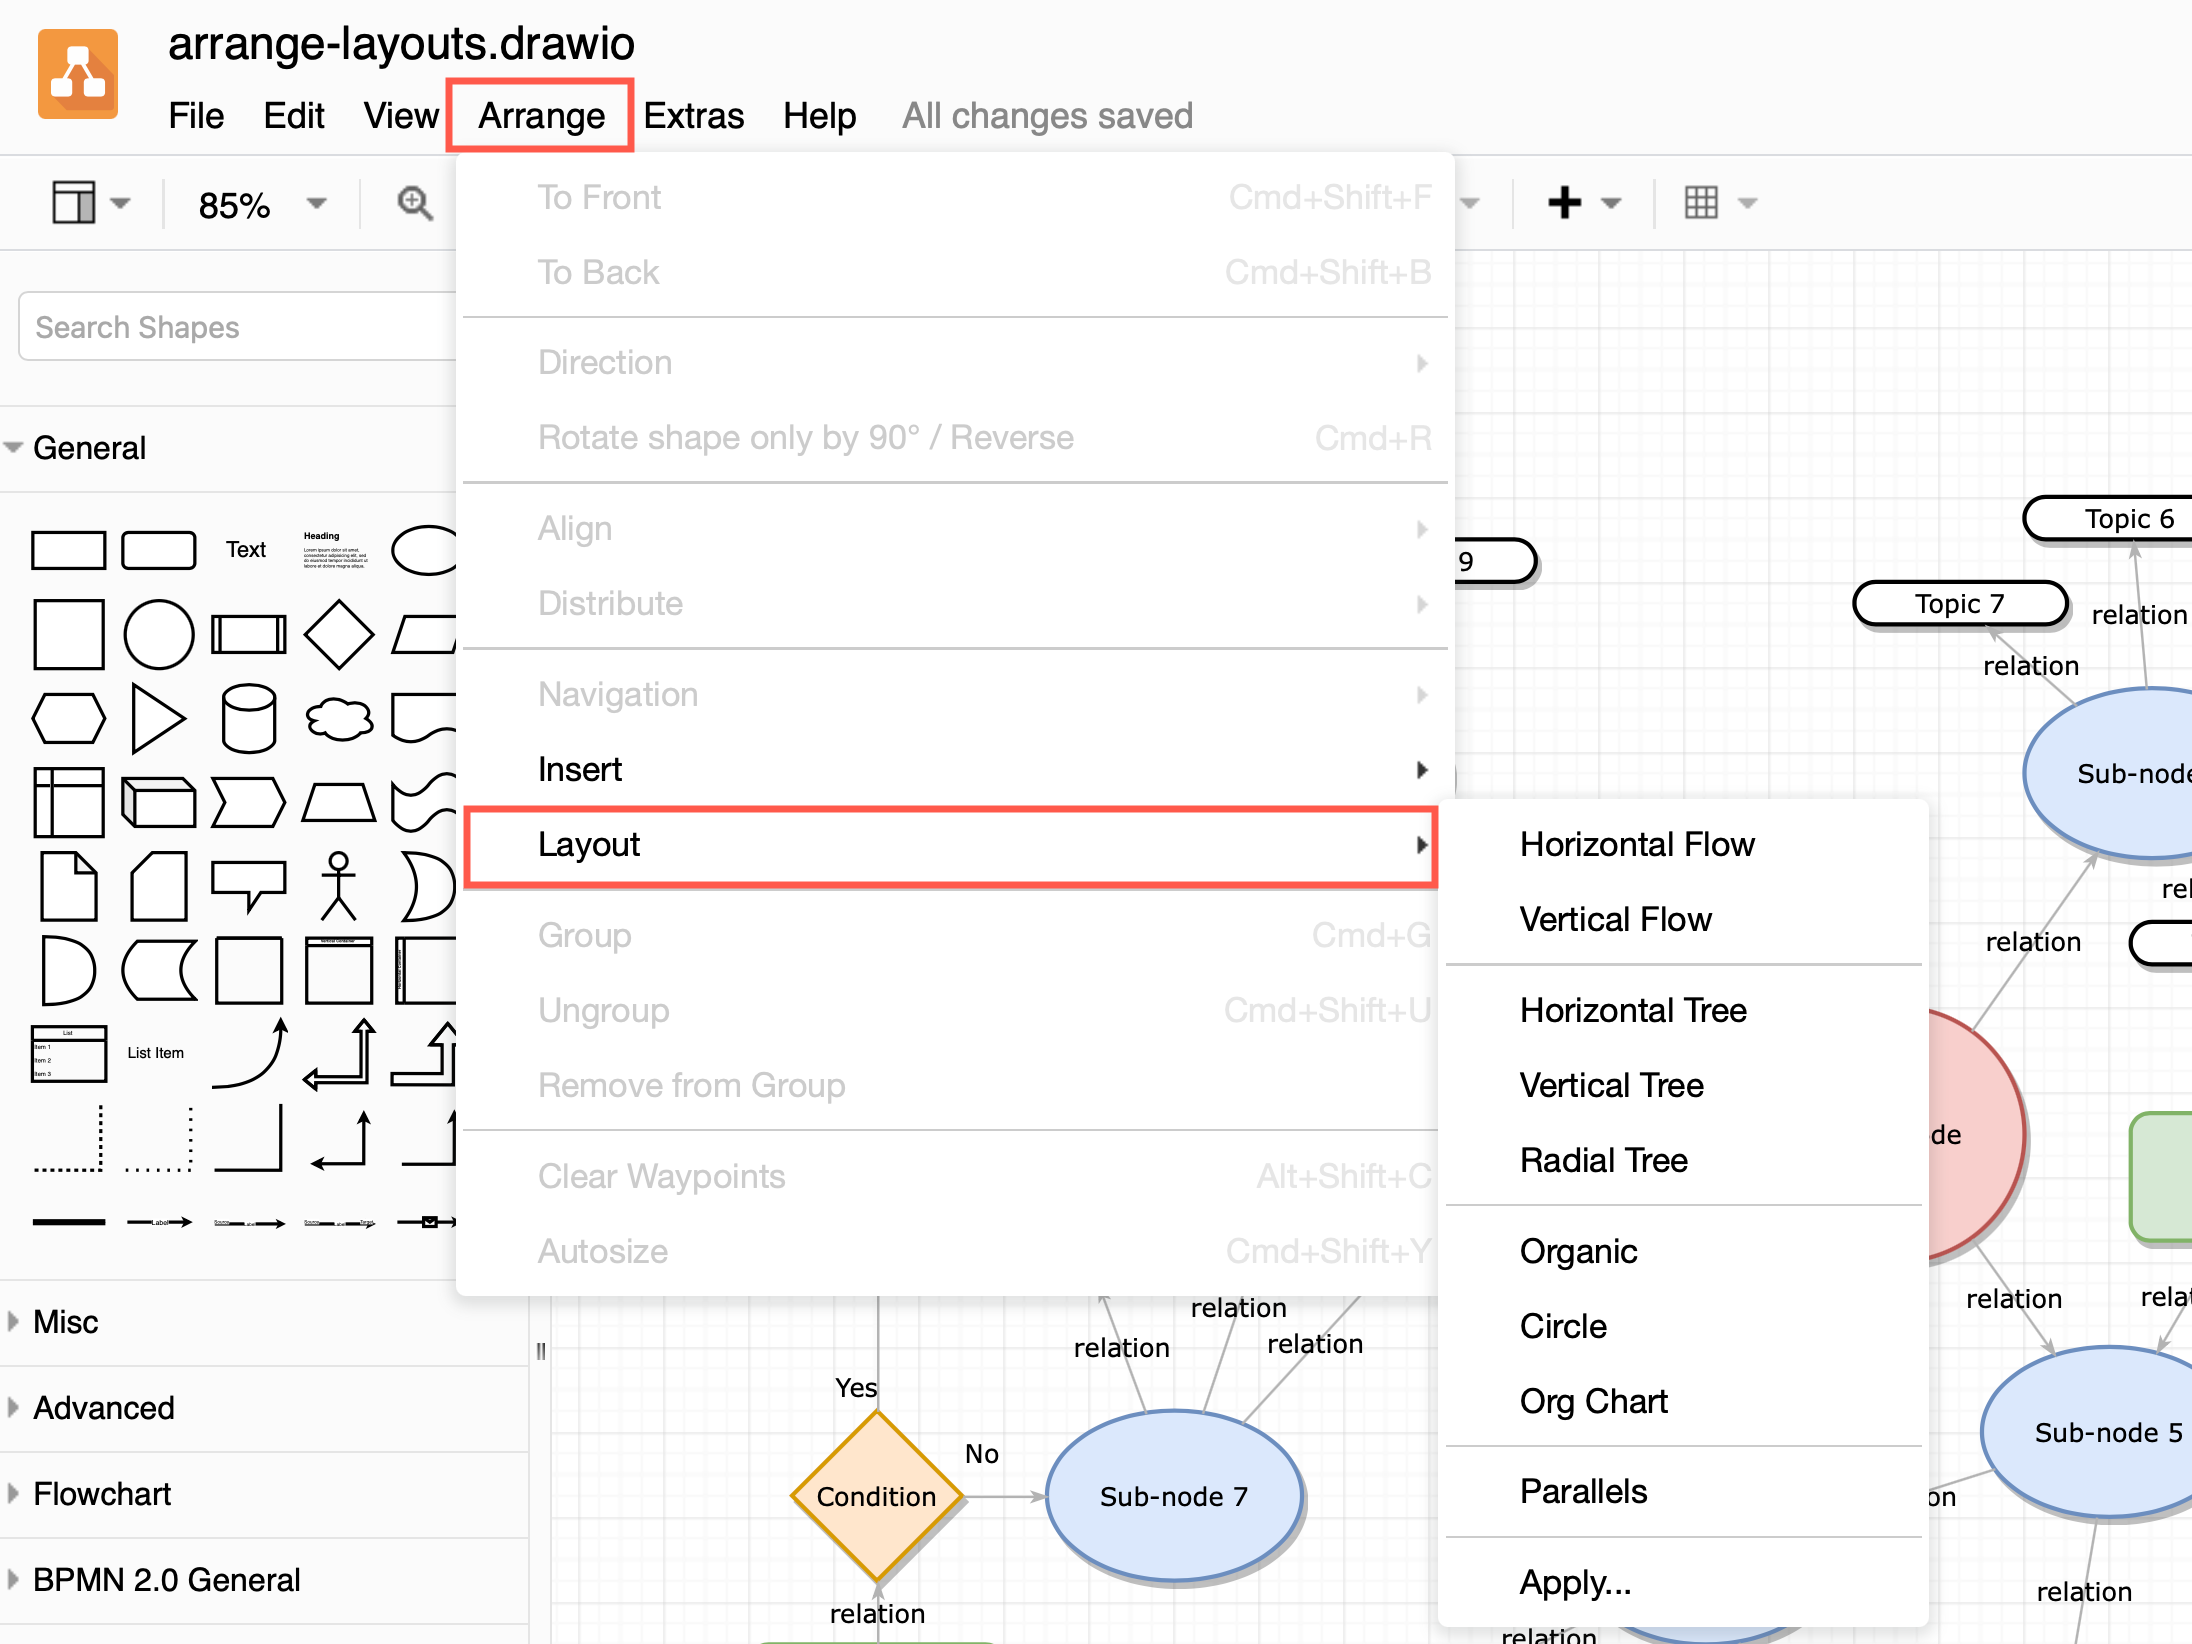 Apply a layout via Arrange > Layout to automatically rearrange the shapes and connectors in draw.io